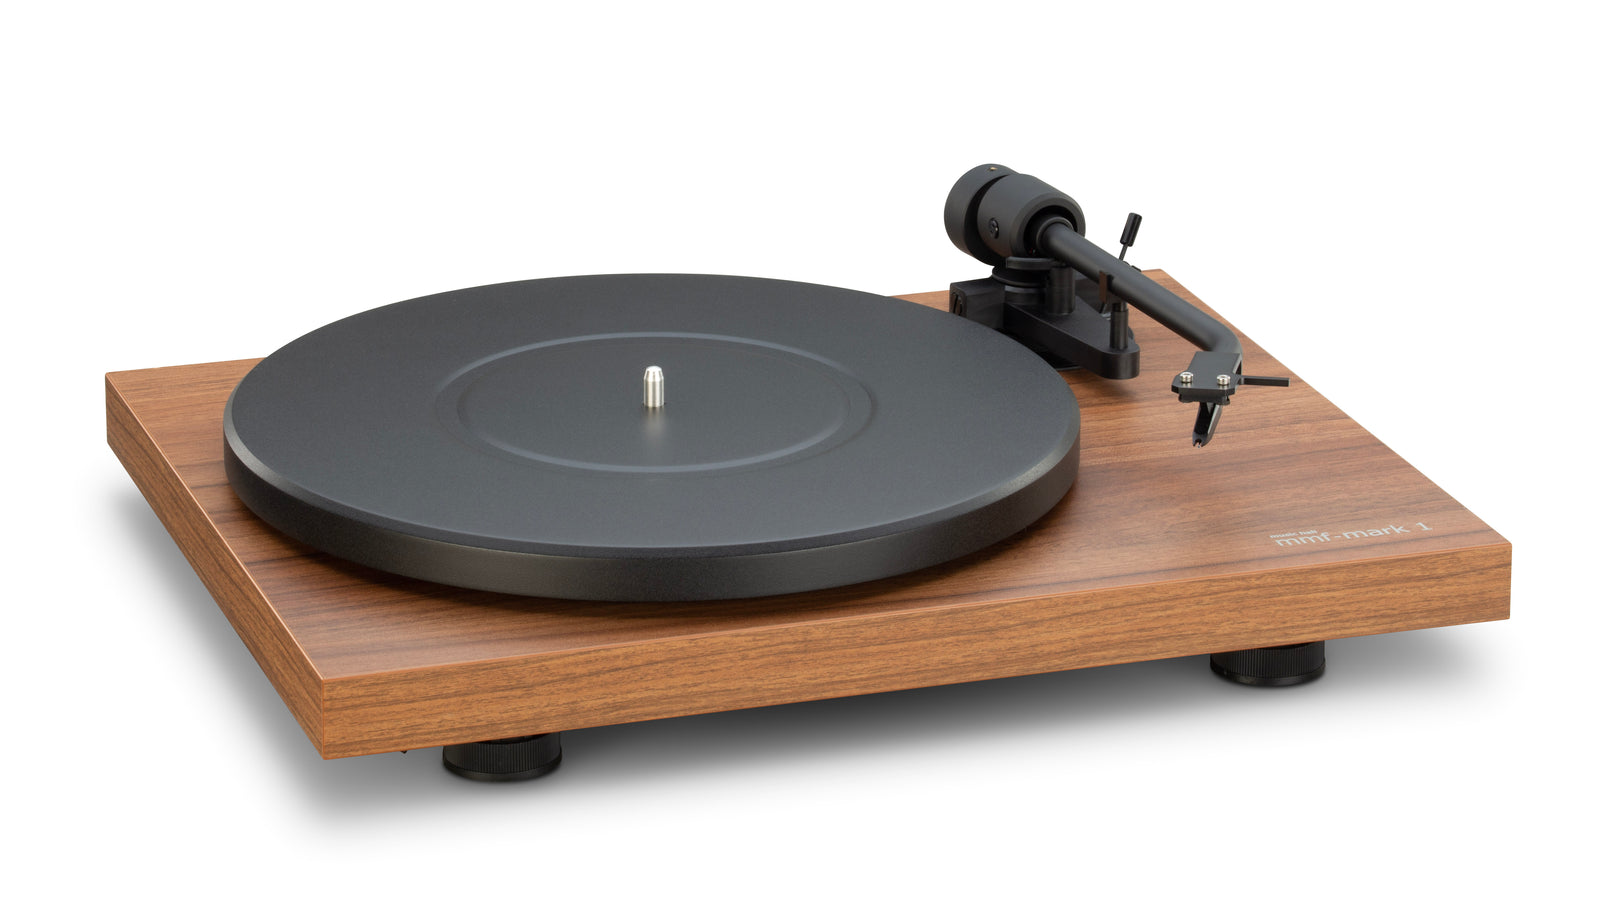 Product Highlights: Low noise, belt-drive design High-gloss piano lacquer finish or walnut veneer High-quality 8.6” S-shape aluminum tonearm with headshell and VTA adjustment and magnetic anti-skating AC synchronous motor for superior speed stability High-quality Ortofon OM 5E cartridge properly aligned and mounted